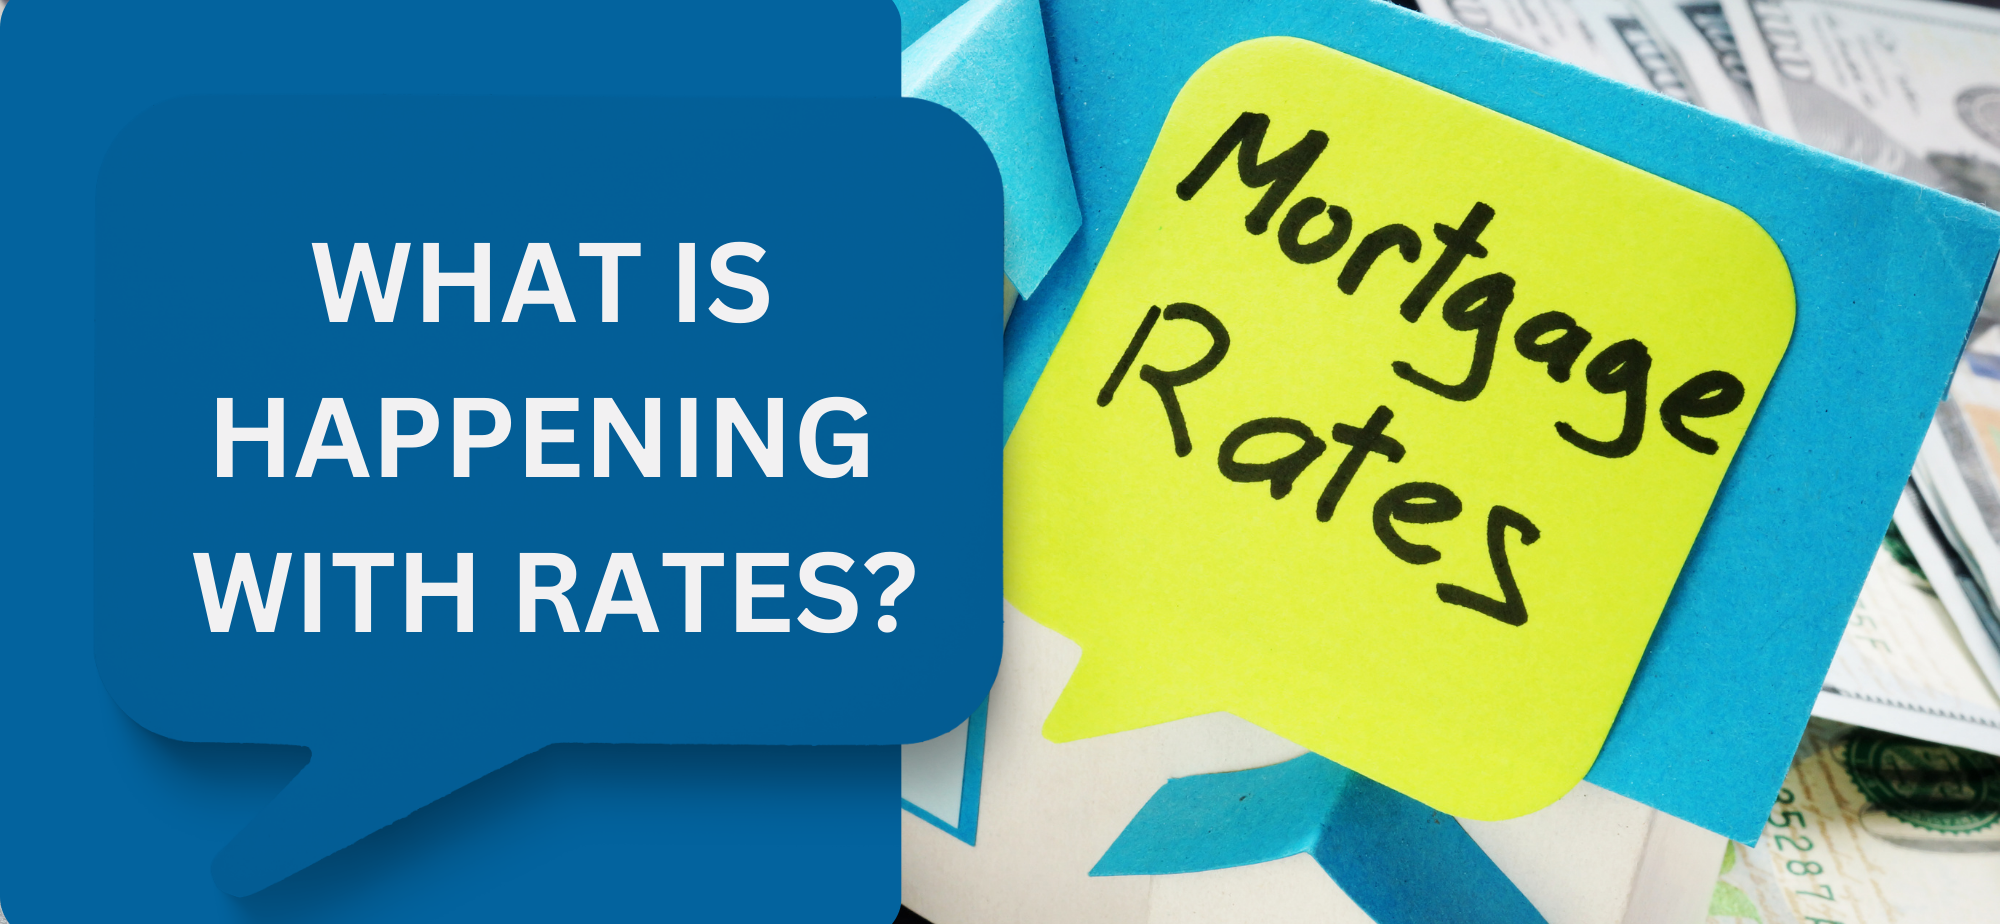 What is happening with mortgage rates?